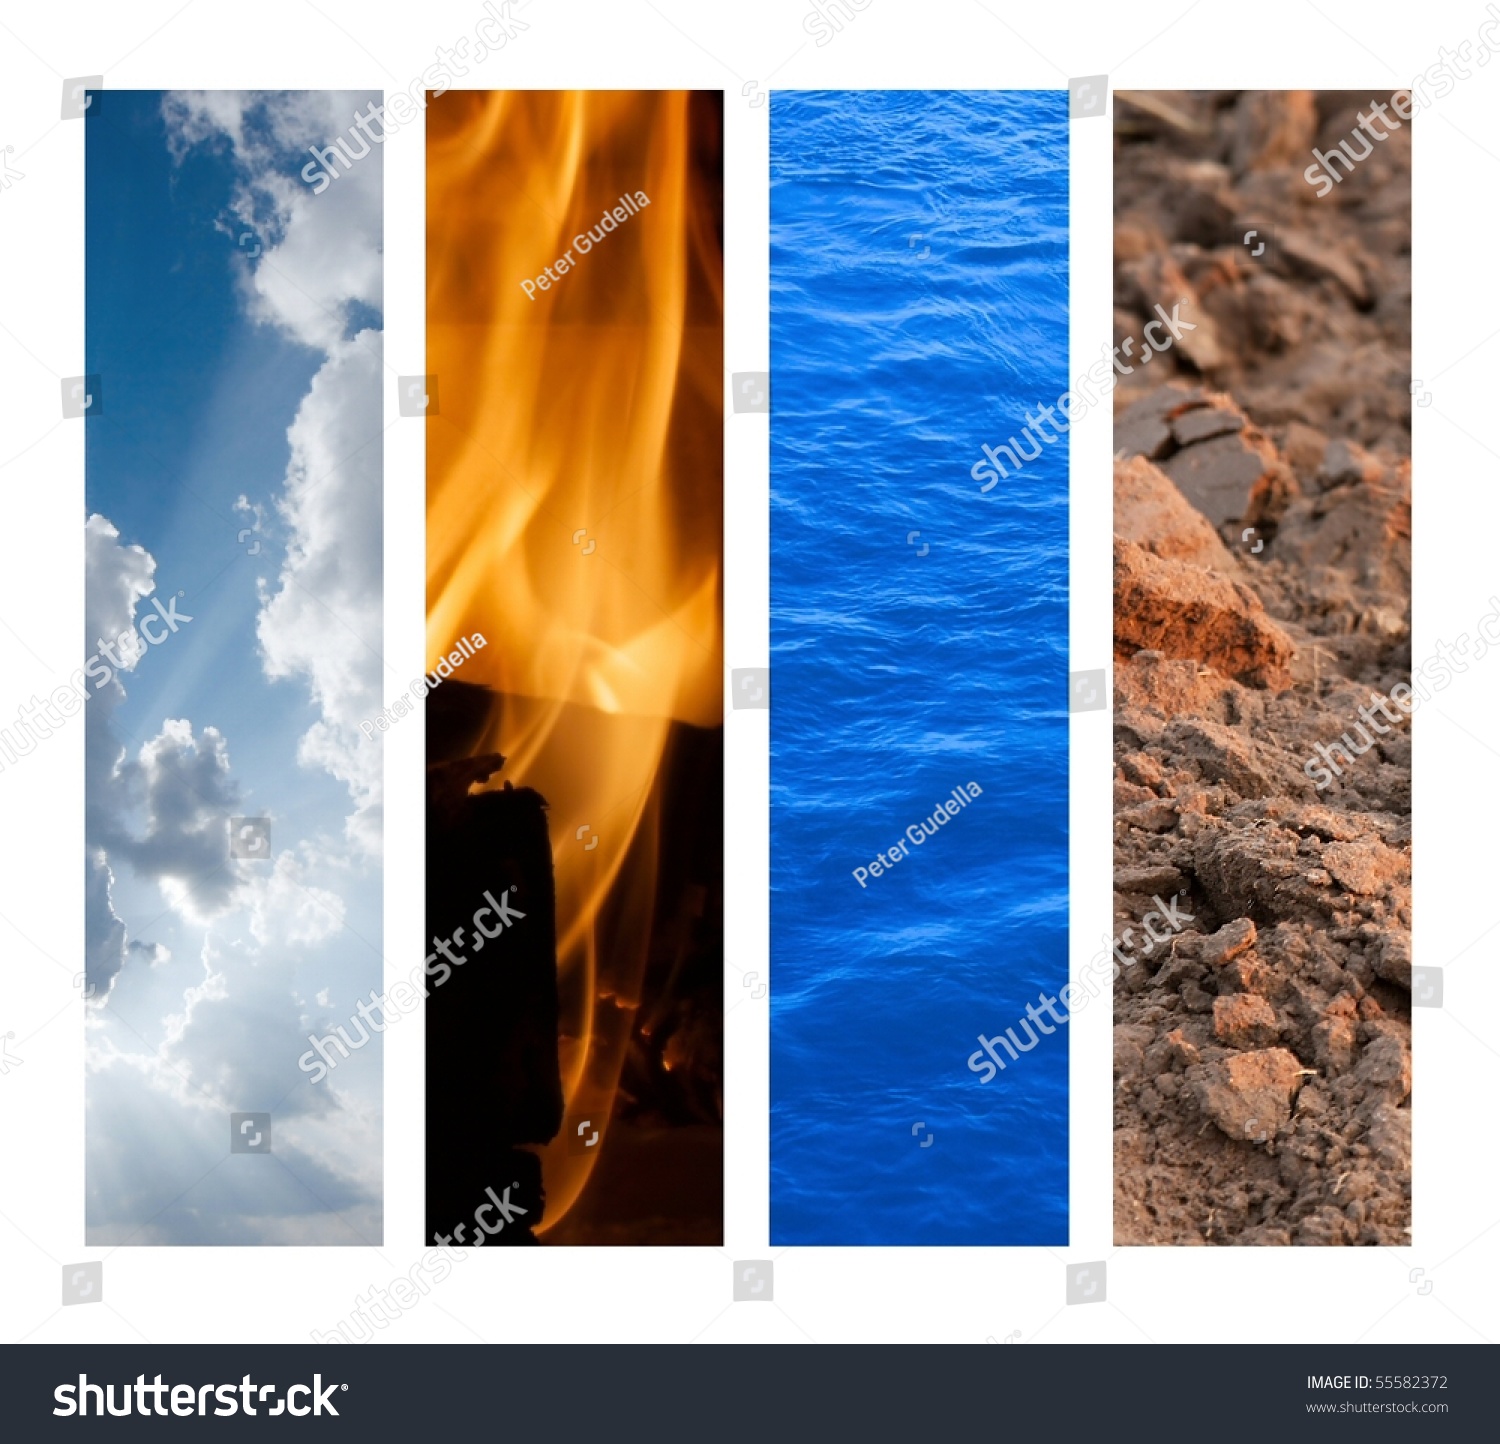 The Four Elements #55582372